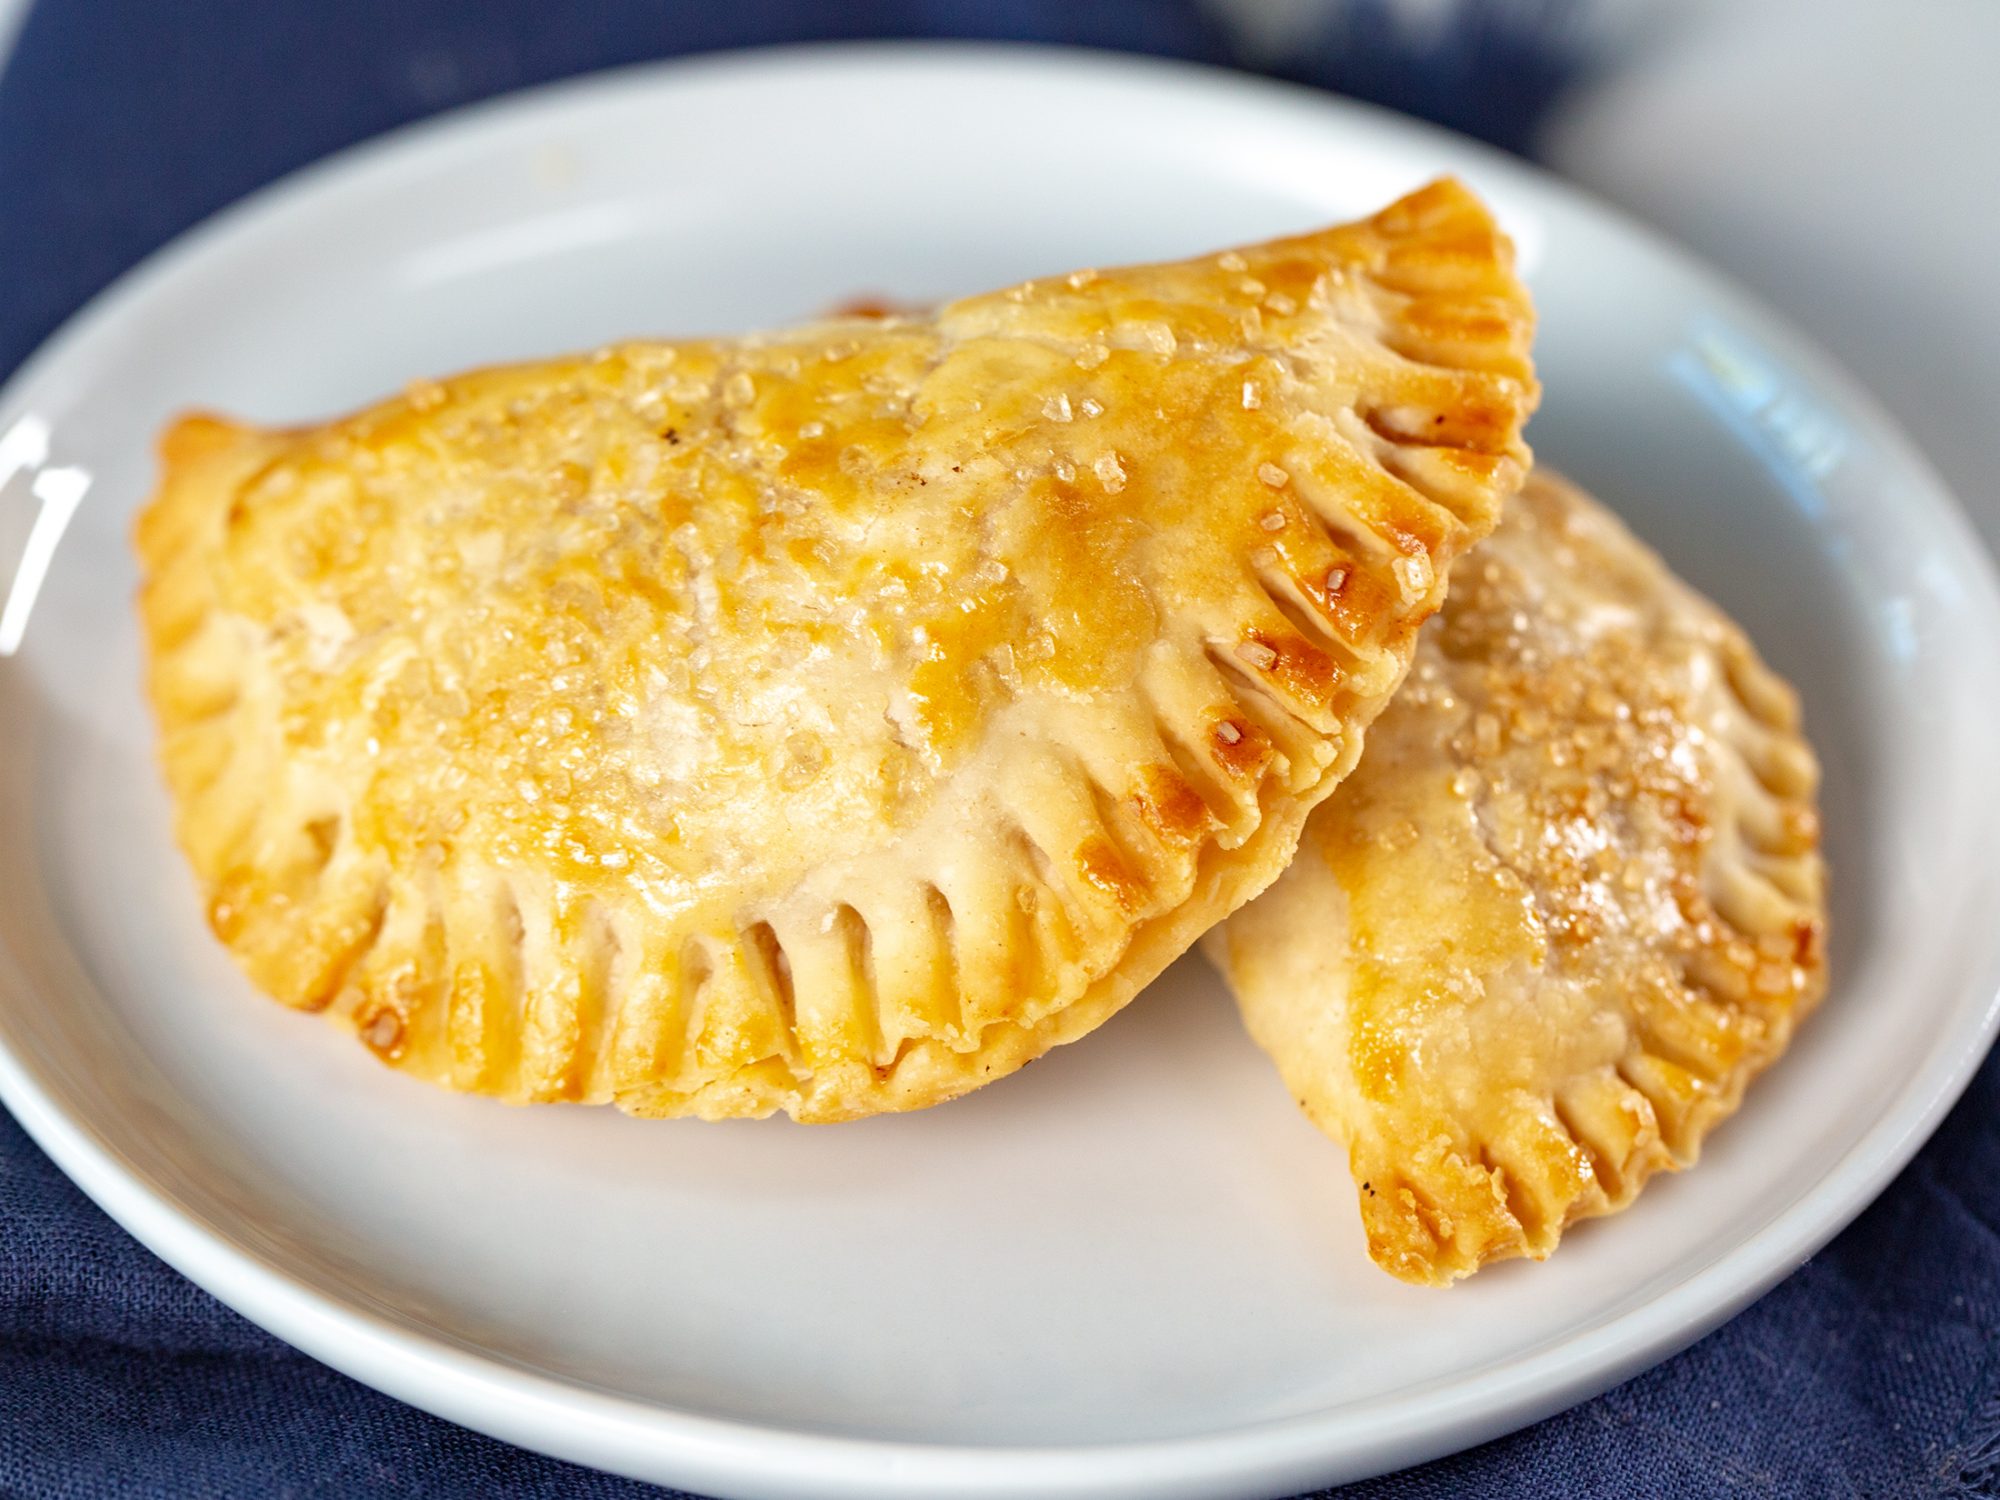 https://static.onecms.io/wp-content/uploads/sites/19/2019/10/10/air-fried-pies-dcms-large-2000.jpg